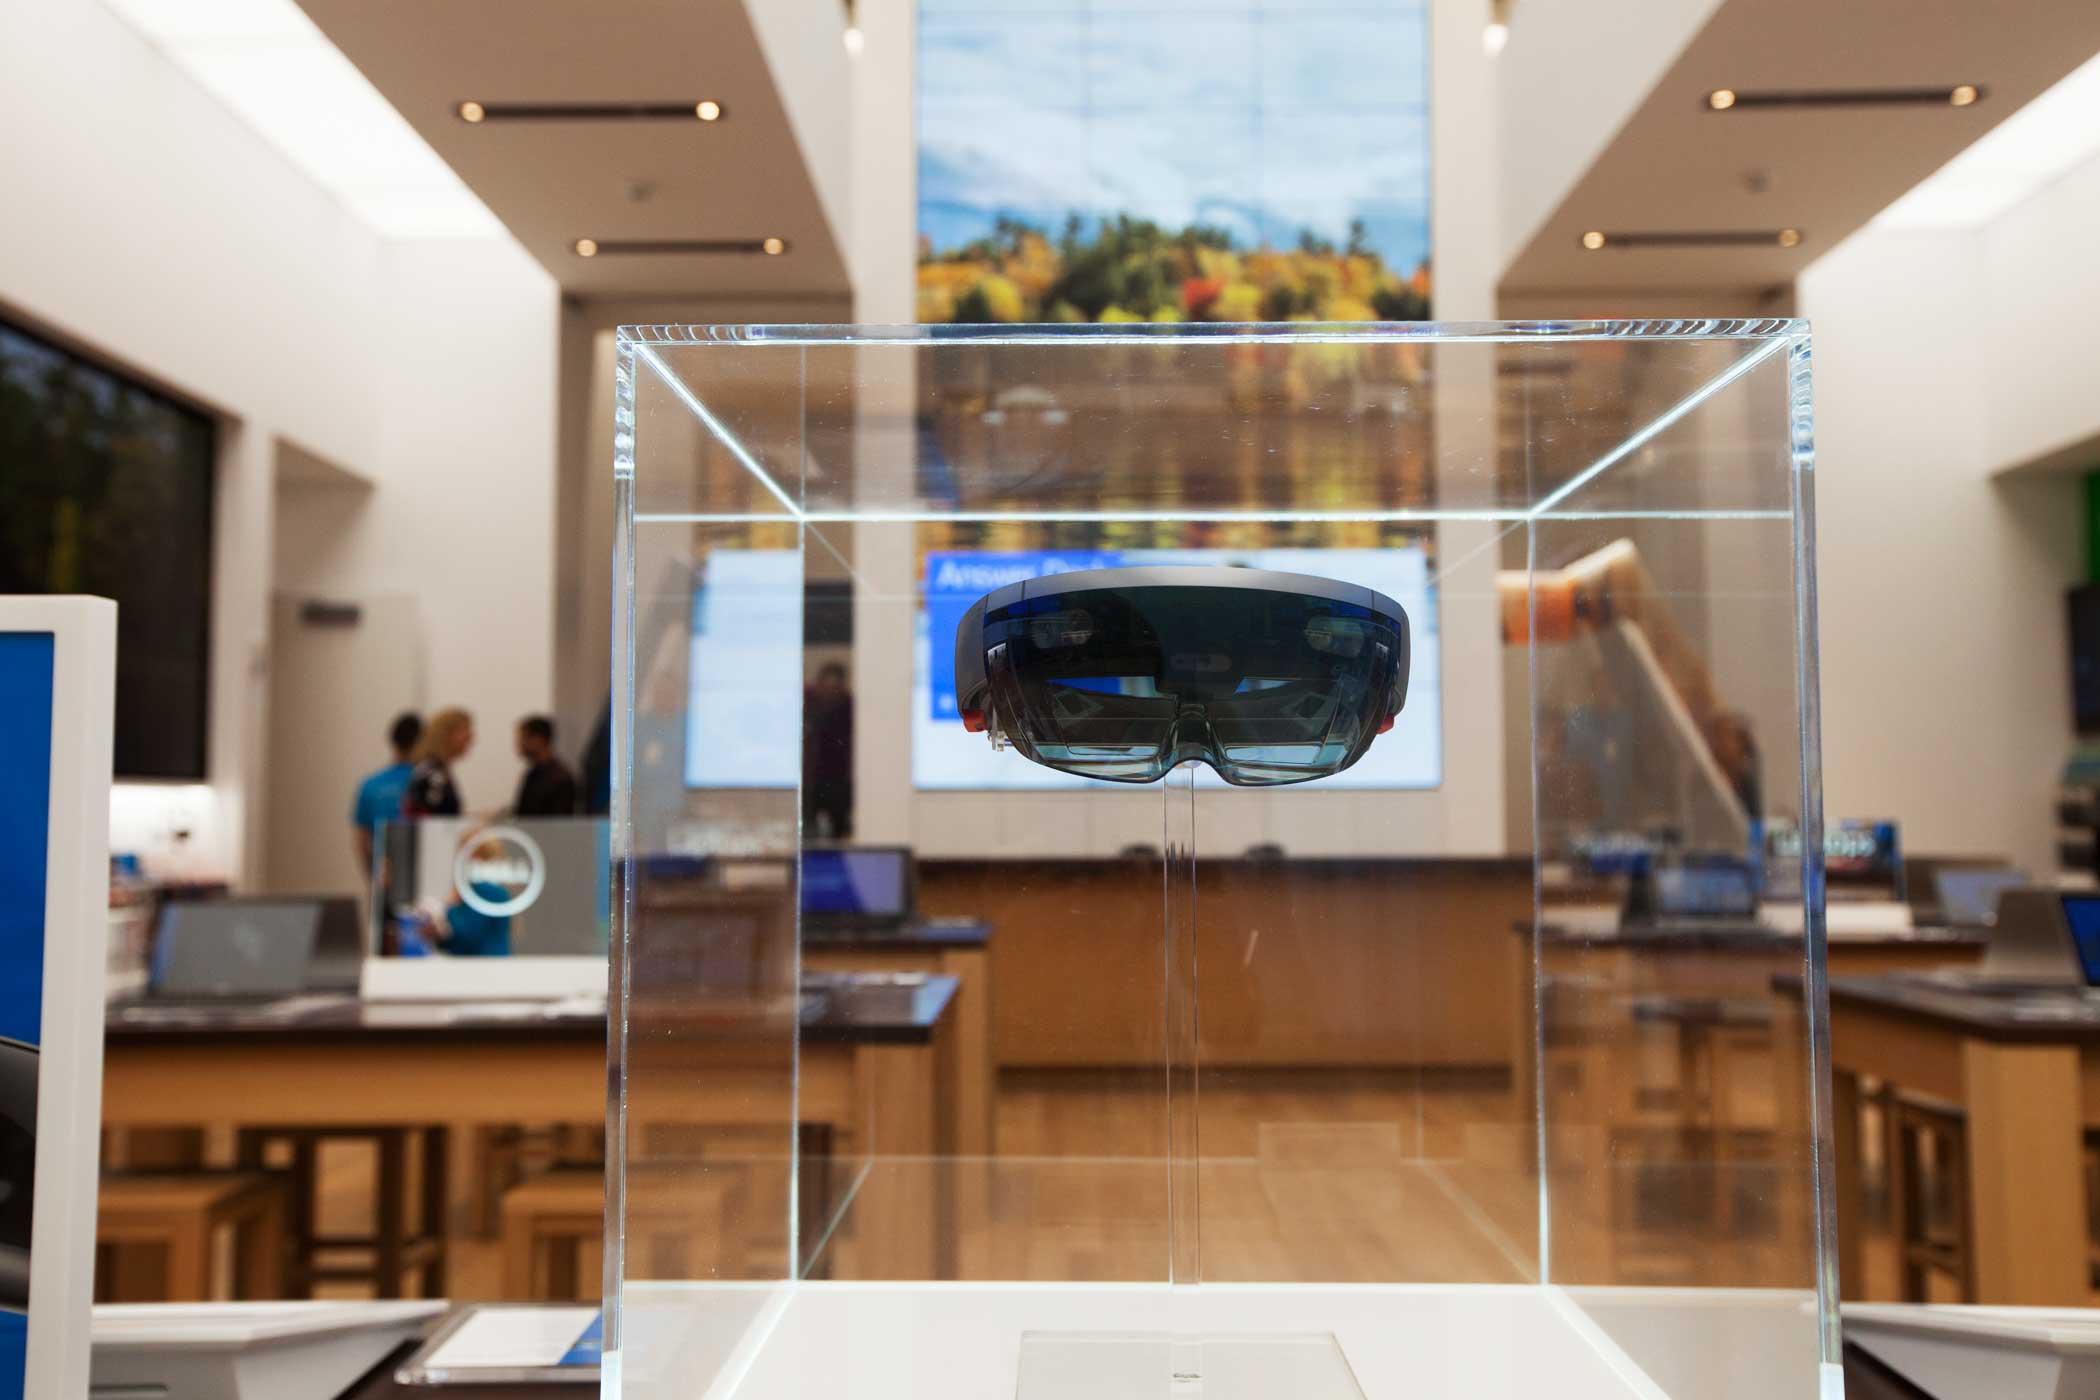 The Hololens, Microsoft's virtual reality headset, is on display but  not yet available for live demonstrations.